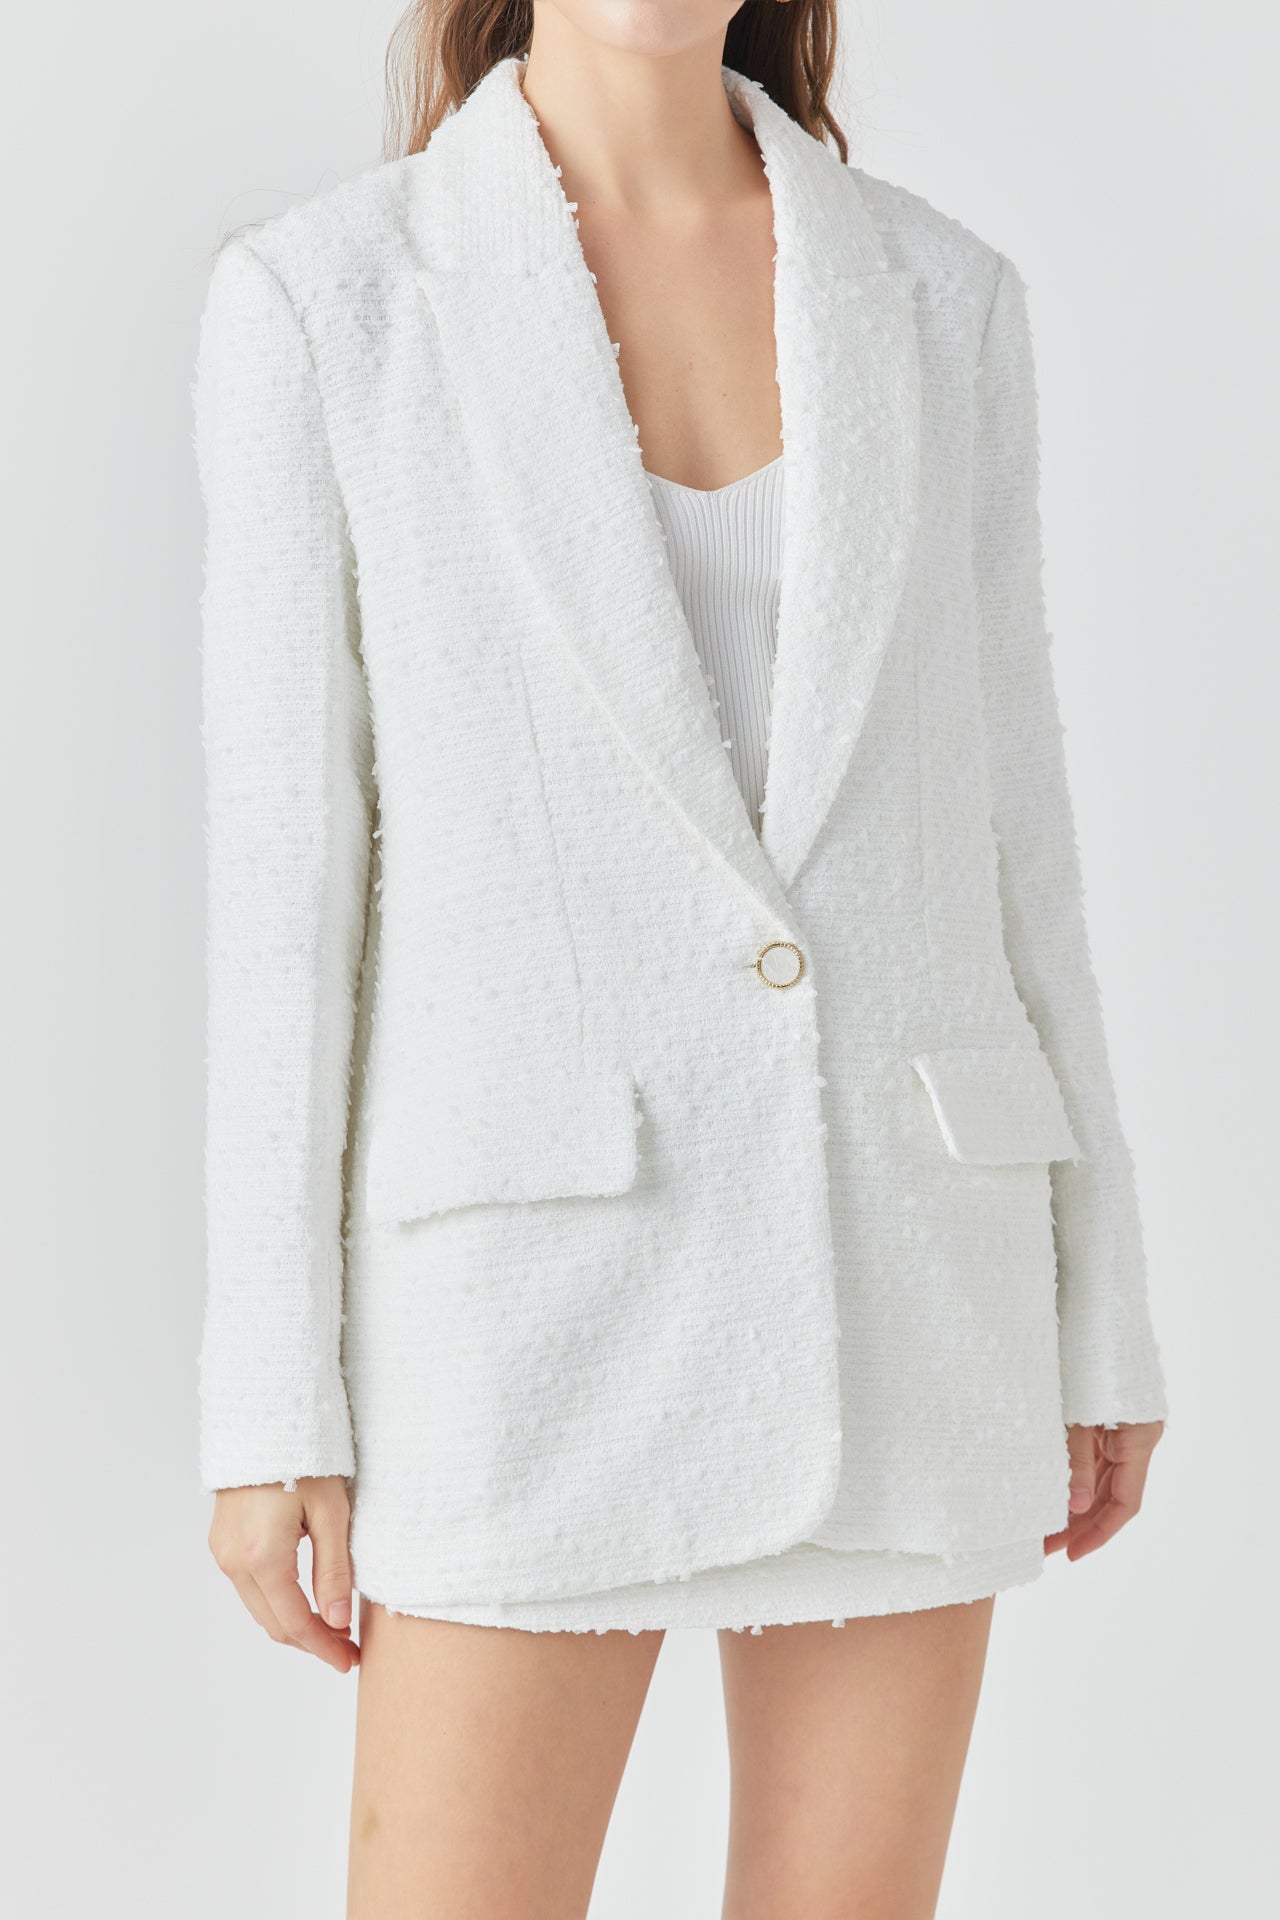 ENDLESS ROSE - Tweed Boyfriend Blazer - BLAZERS available at Objectrare